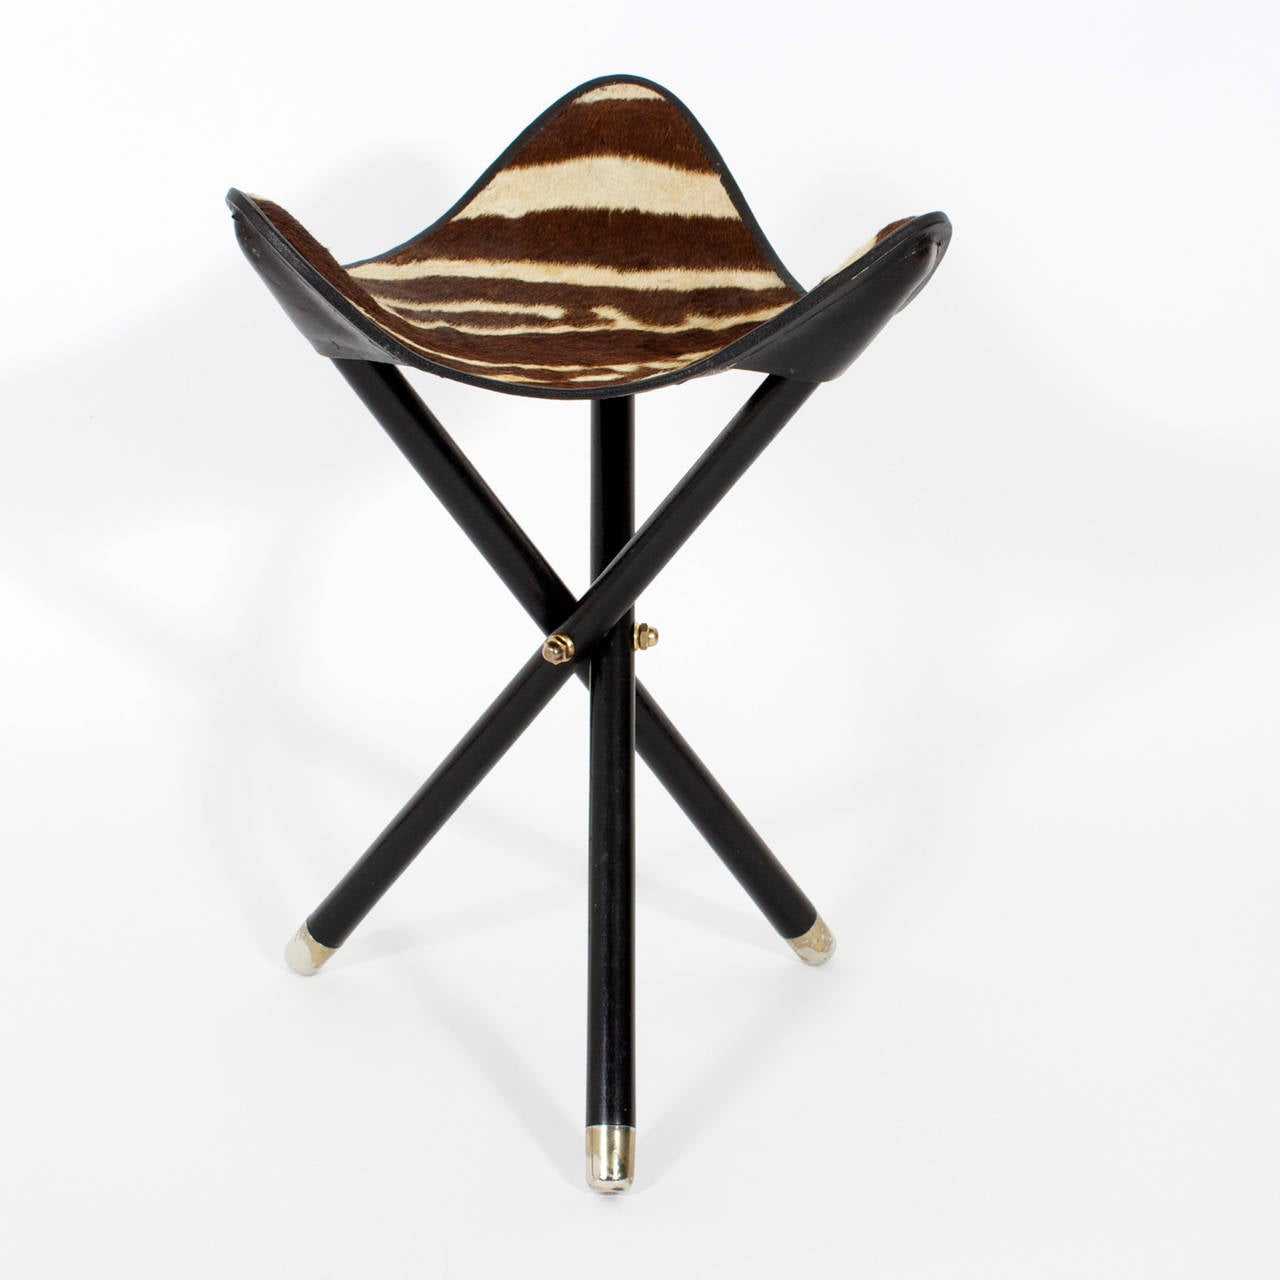 Burchell zebra skin campaign seat or stool with a folding ebonized wood base, and contrasting brass and metal details. Perfect for your next safari.
Newly polished.